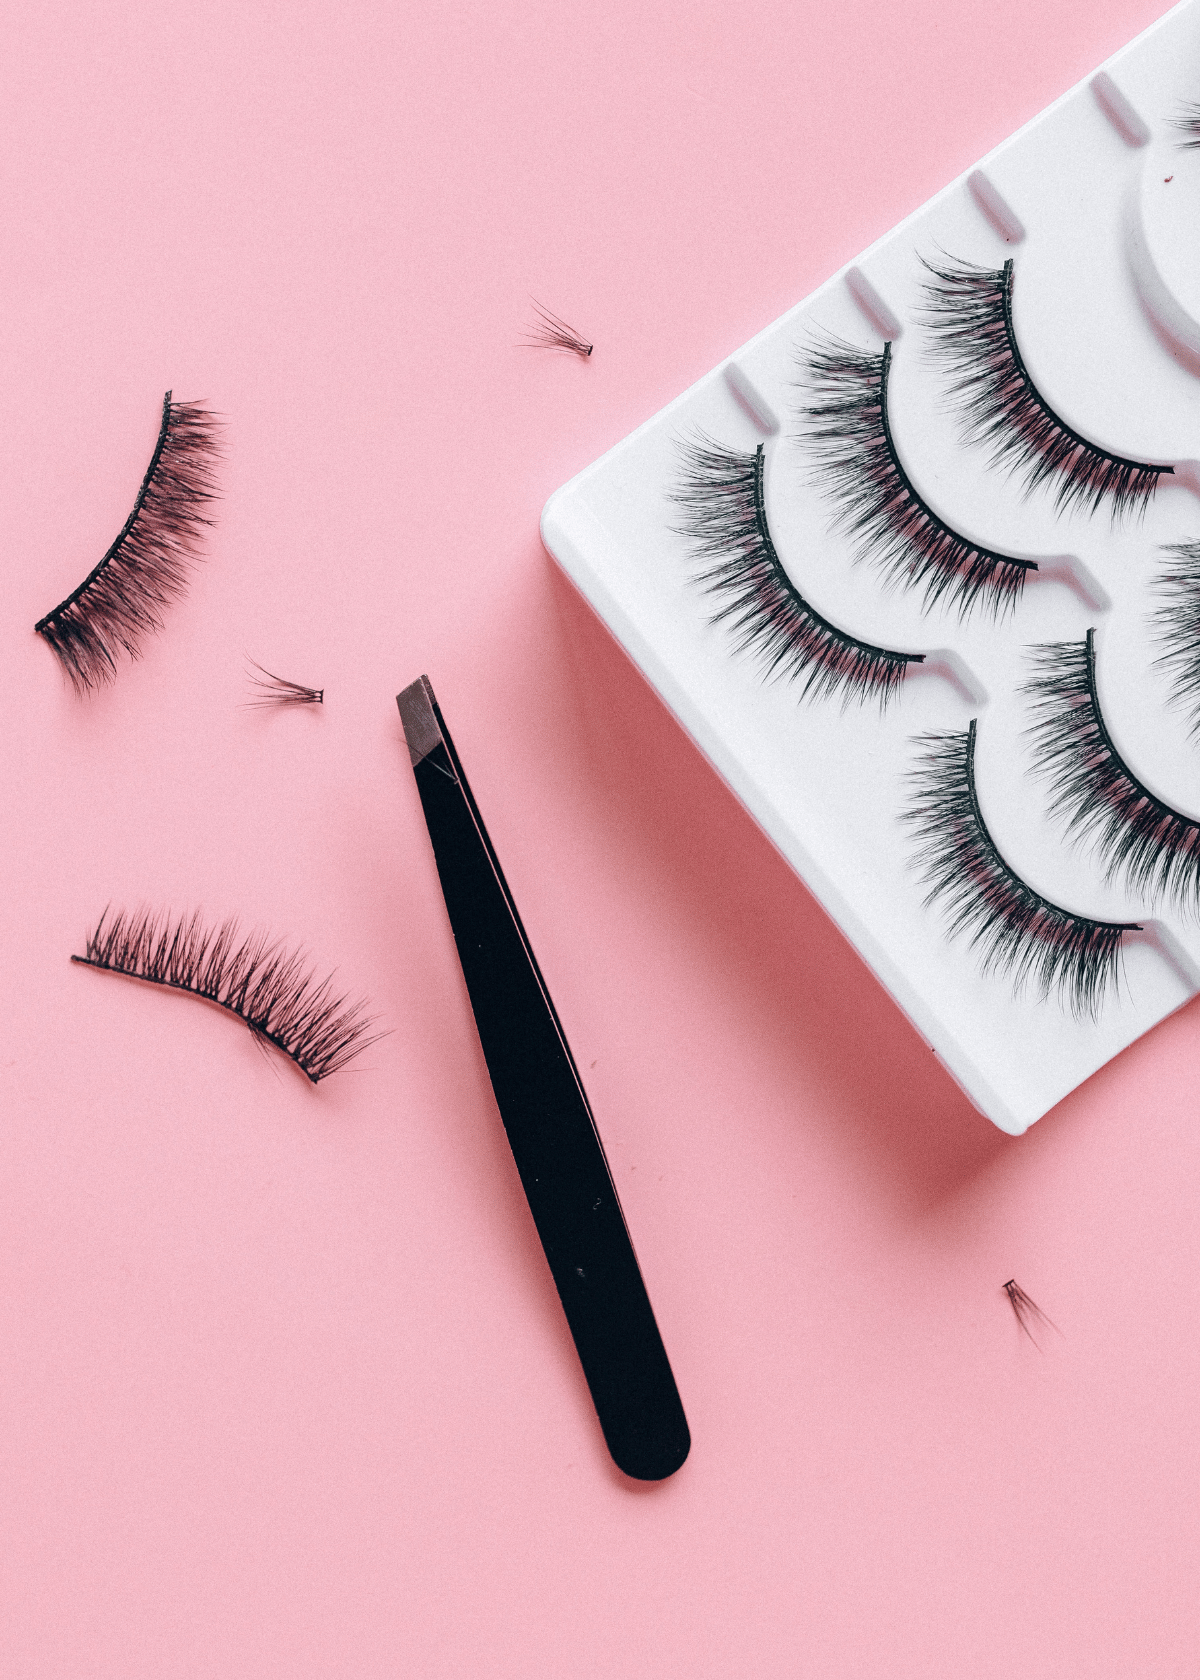 Everything You Need to Know About Choosing Eyelash Glue